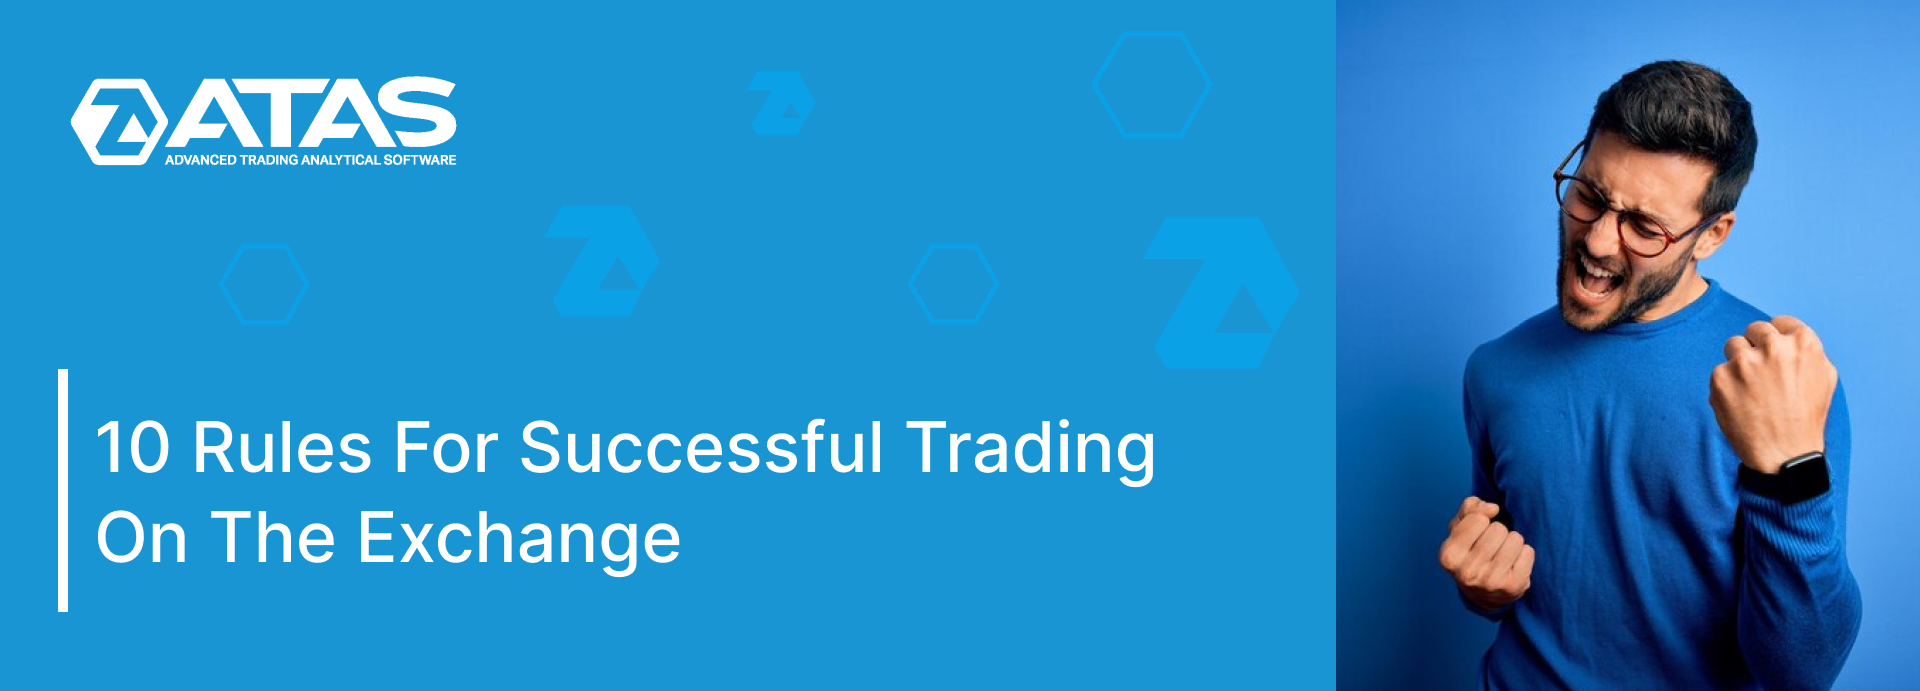 10 rules for successful trading on the exchange